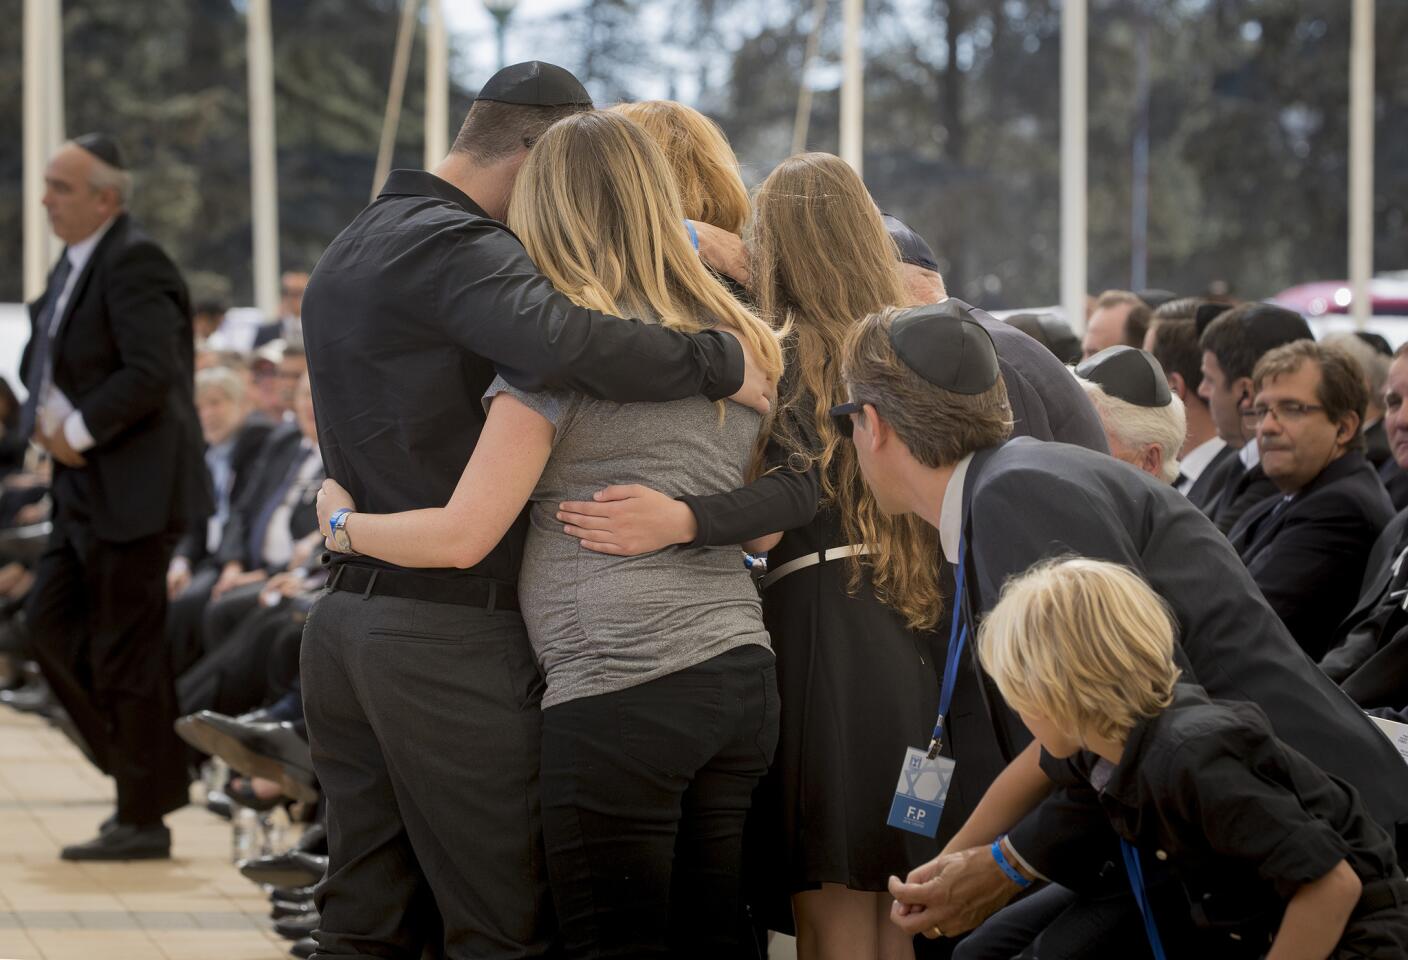 Members of former Israeli President Shimon Peres' family embrace at his funeral at Mt. Herzl Military Cemetery in Jerusalem.